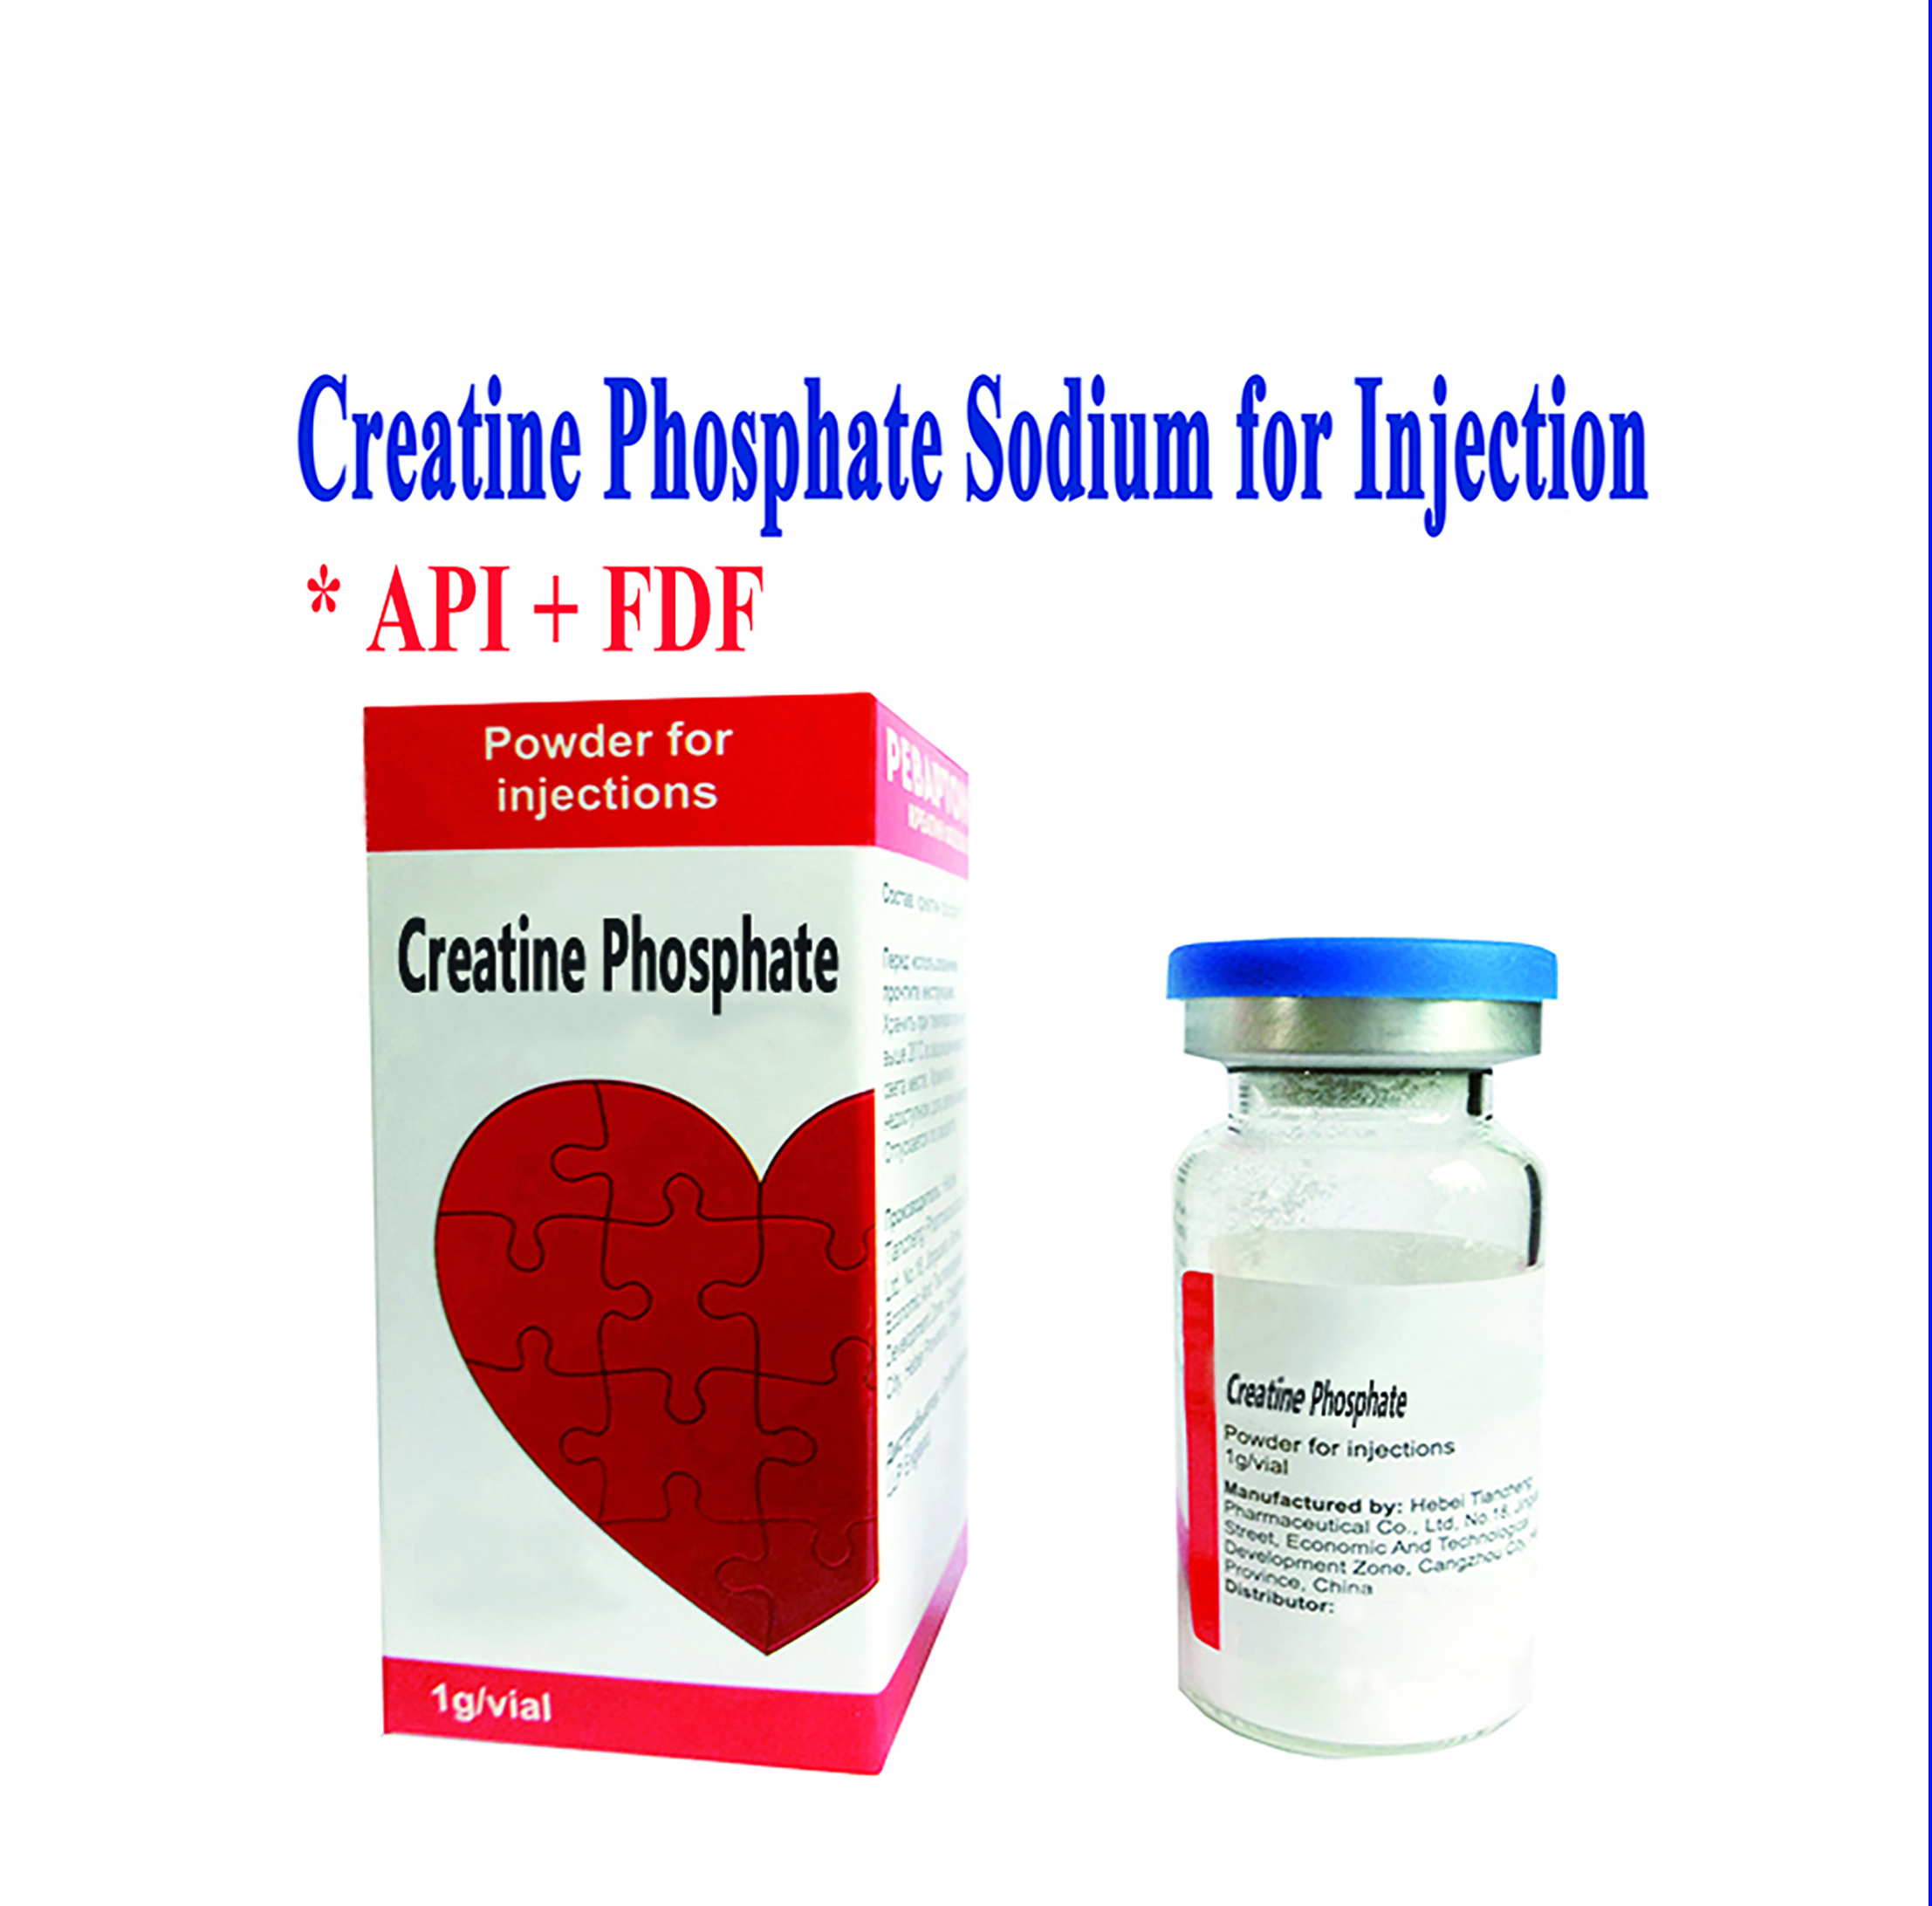 CREATINE PHOSPHATE SODIUM FOR INJECTION